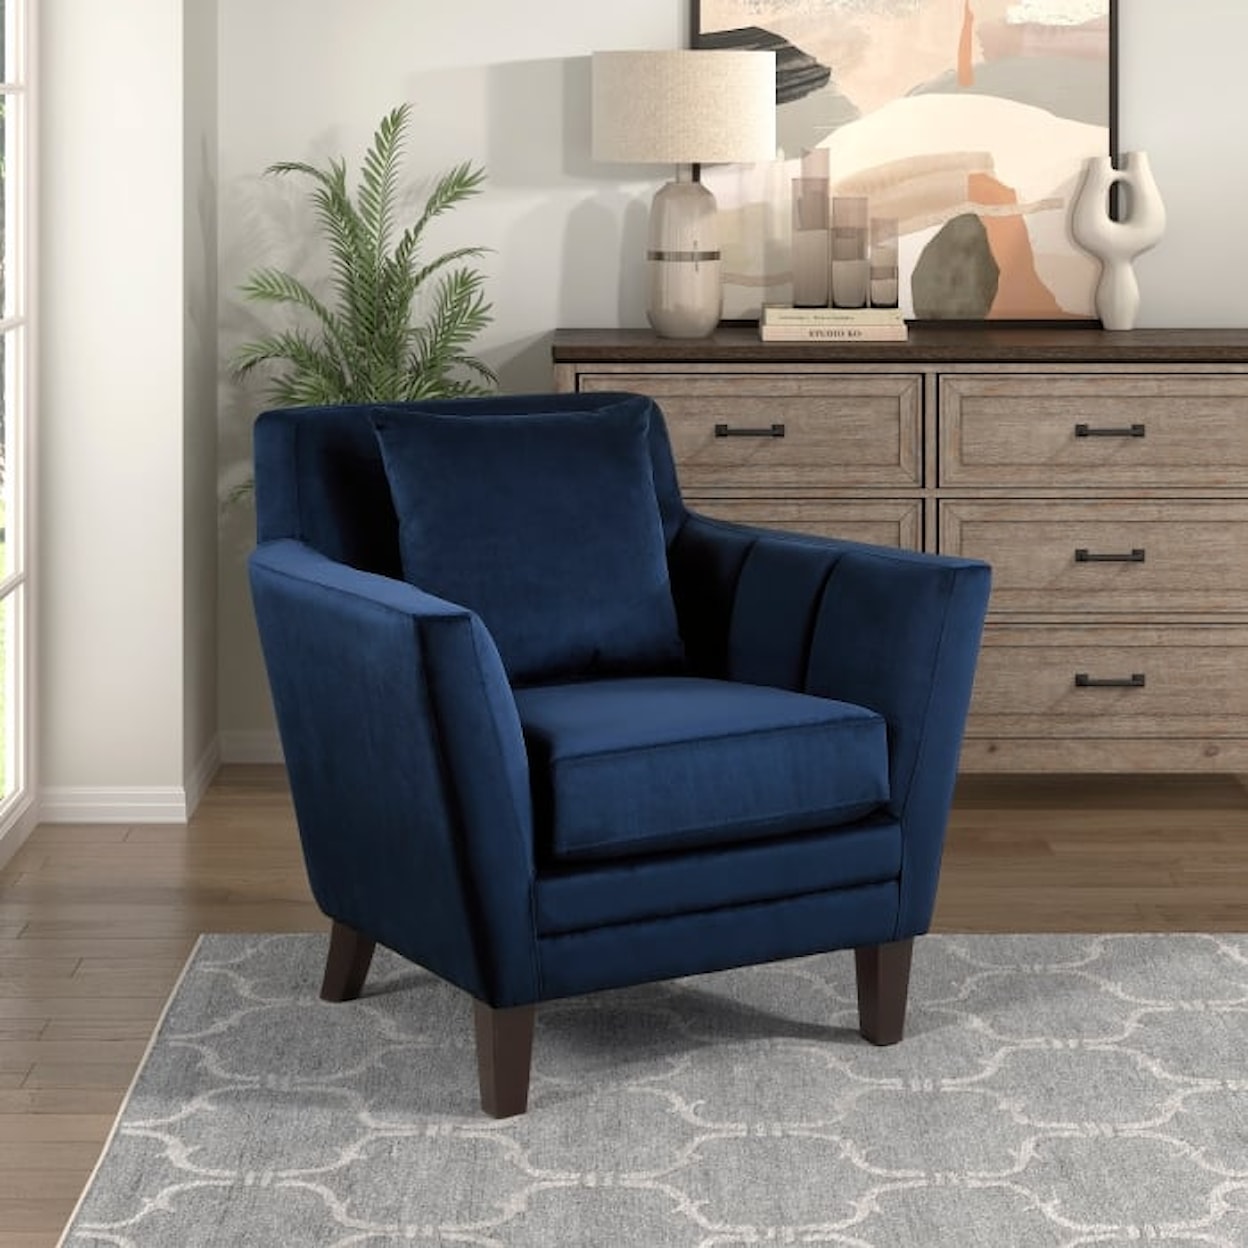 Homelegance Adore Accent Chair